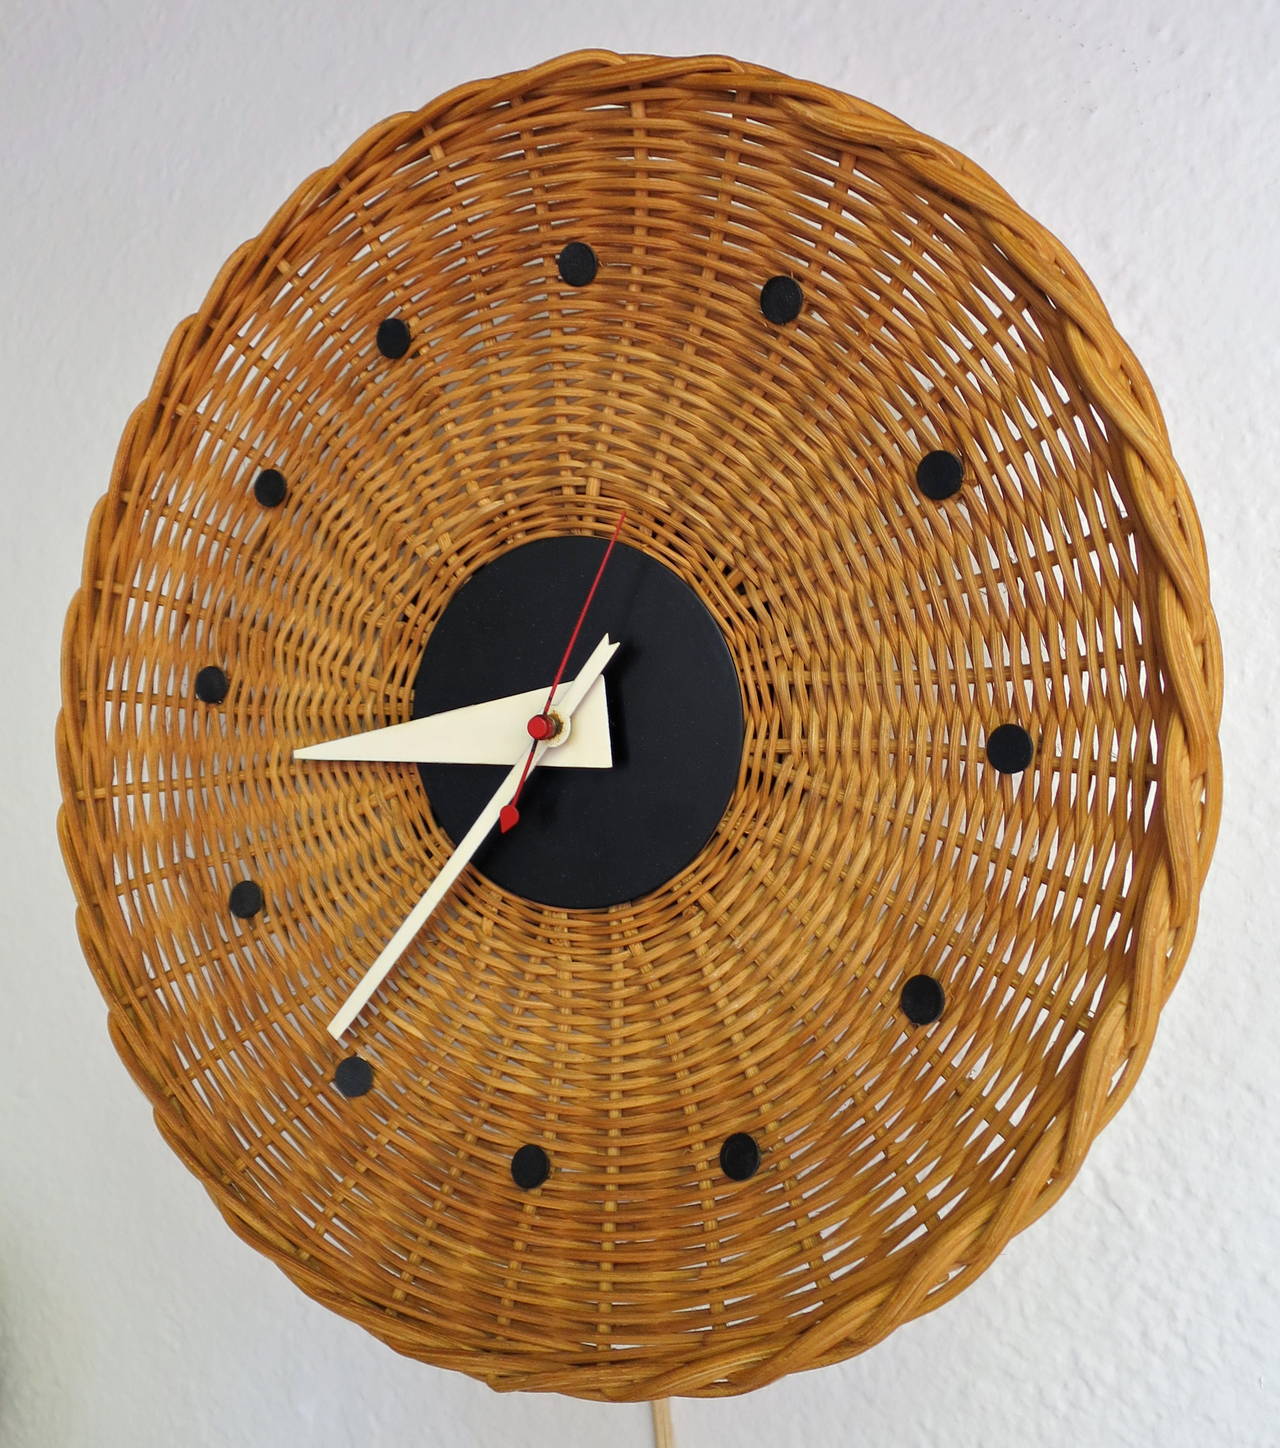 Mid-Century Round Basket Wall Clock.  Designed by George Nelson for Howard Miller.  Overall very nice original working condition.  Minor wear consistent with age/use.  Circa 1950's.